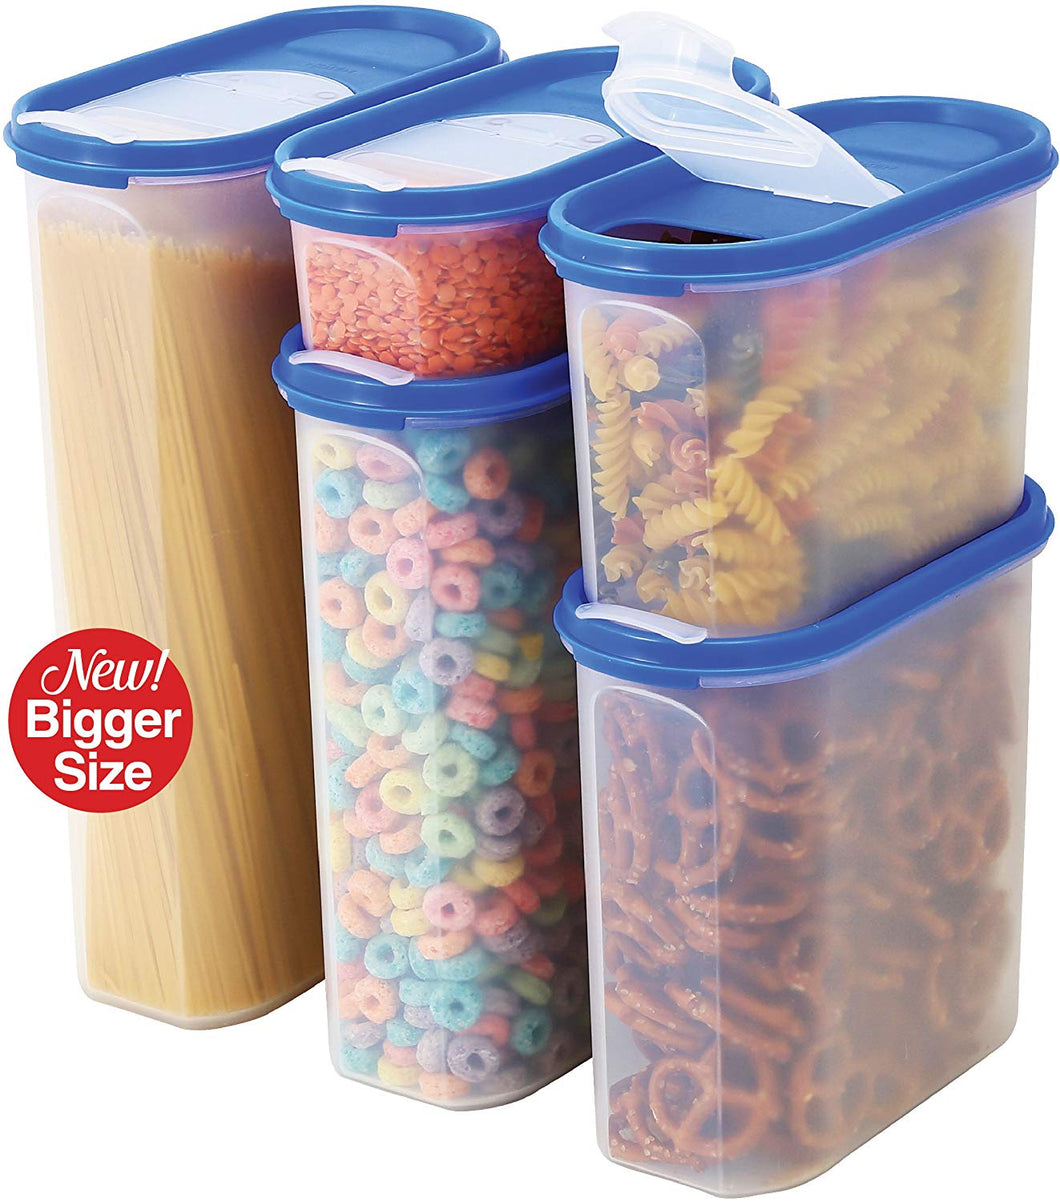 Food Storage Containers Set -STACKO- 10 PC. SET - Airtight Dry Food Container with POURING LIDS - Durable Clear Frosted Plastic BPA Free - Space Saver Modular Design - 5 Container set